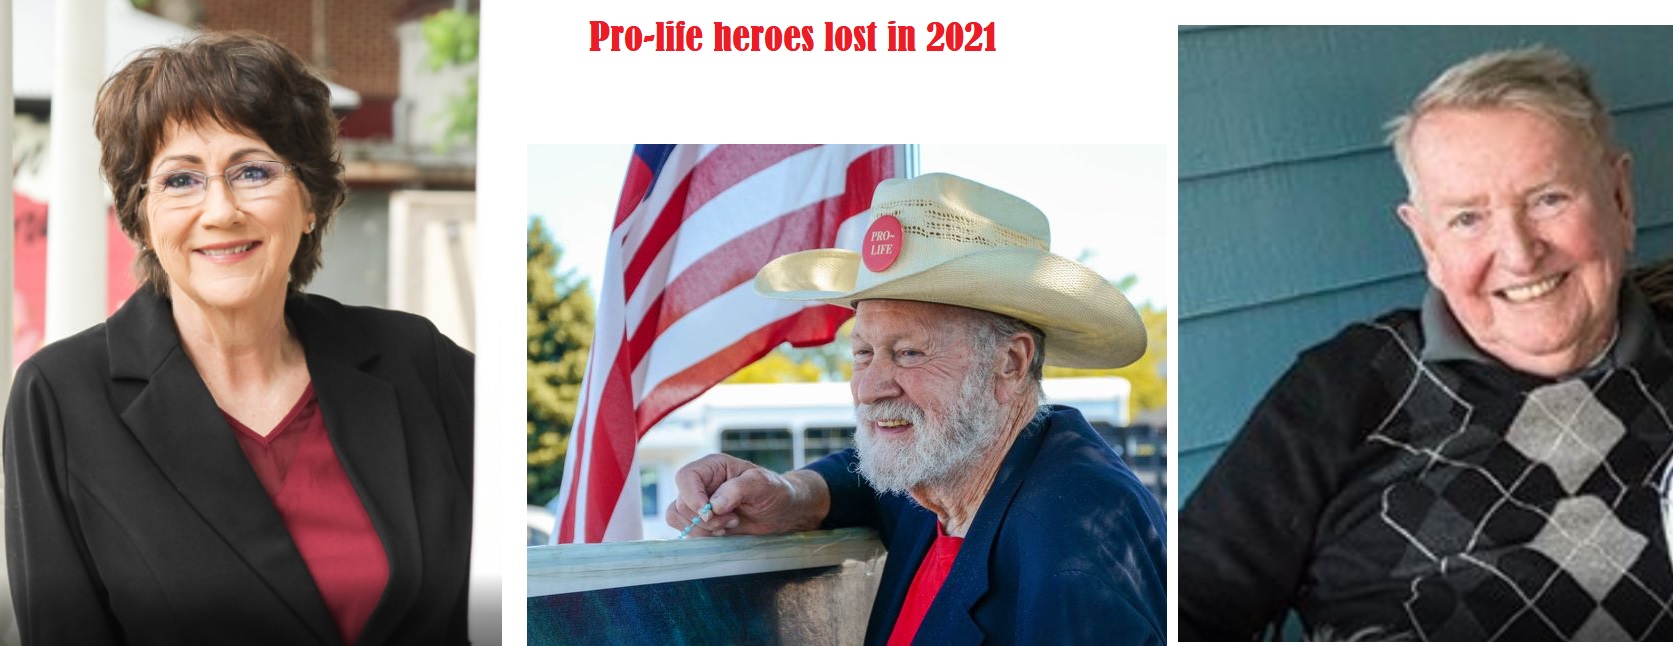 Pro-life heroes Sue Thayer Joe Scheidler and Paul Brown lost in 2021